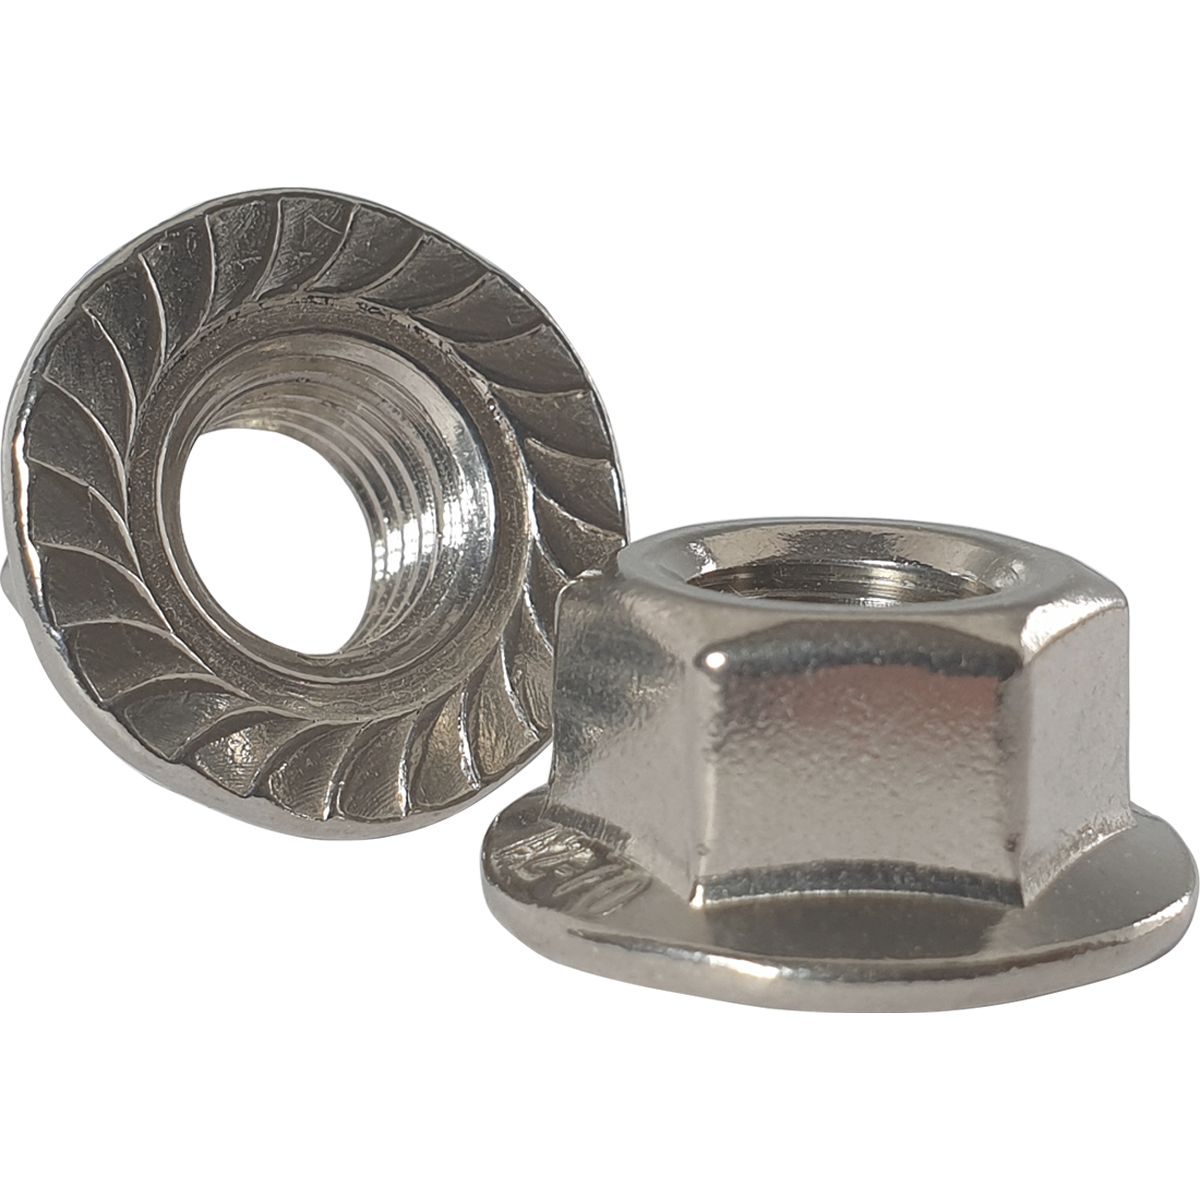 A2 stainless steel serrated flange nuts in various diameters and at competitive prices